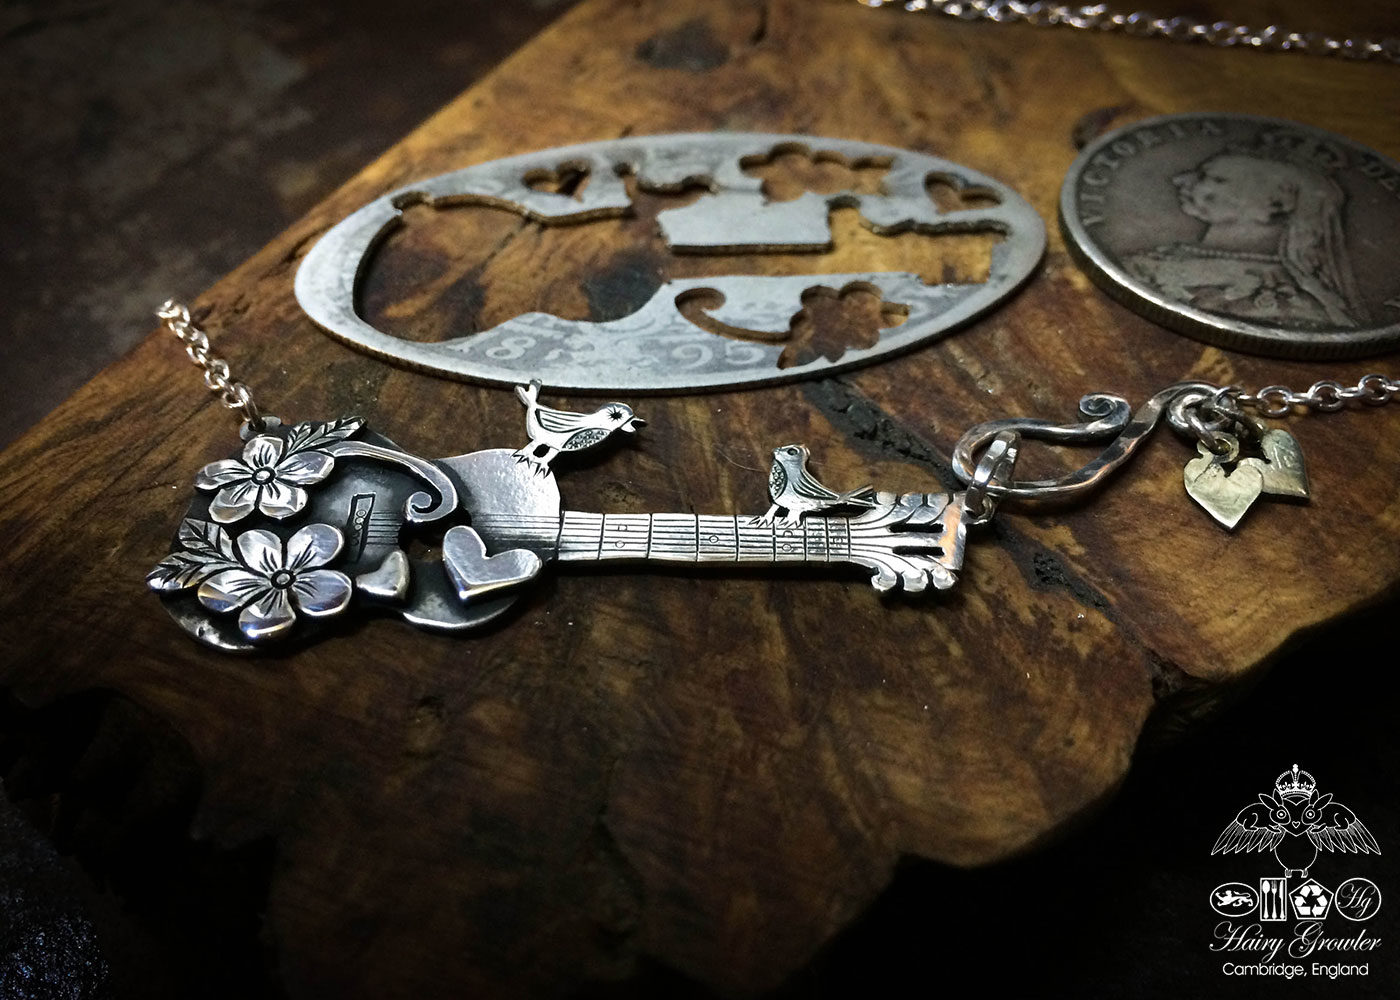 Handmade and upcycled sterling silver bird guitar necklace based on this silver Florin coin